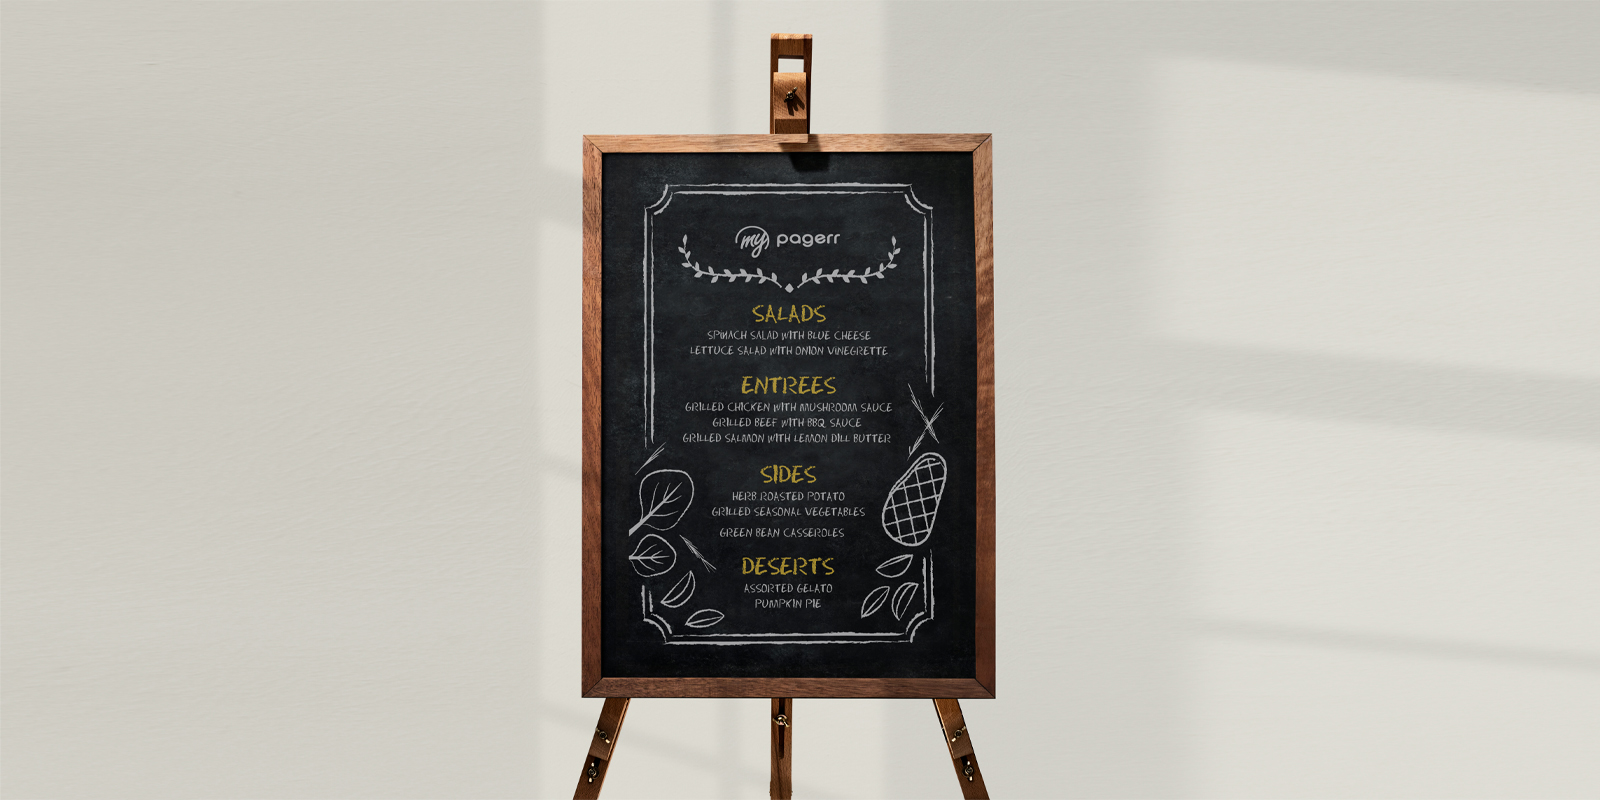 Chalkboard signs in Valencia - Print with Pagerr